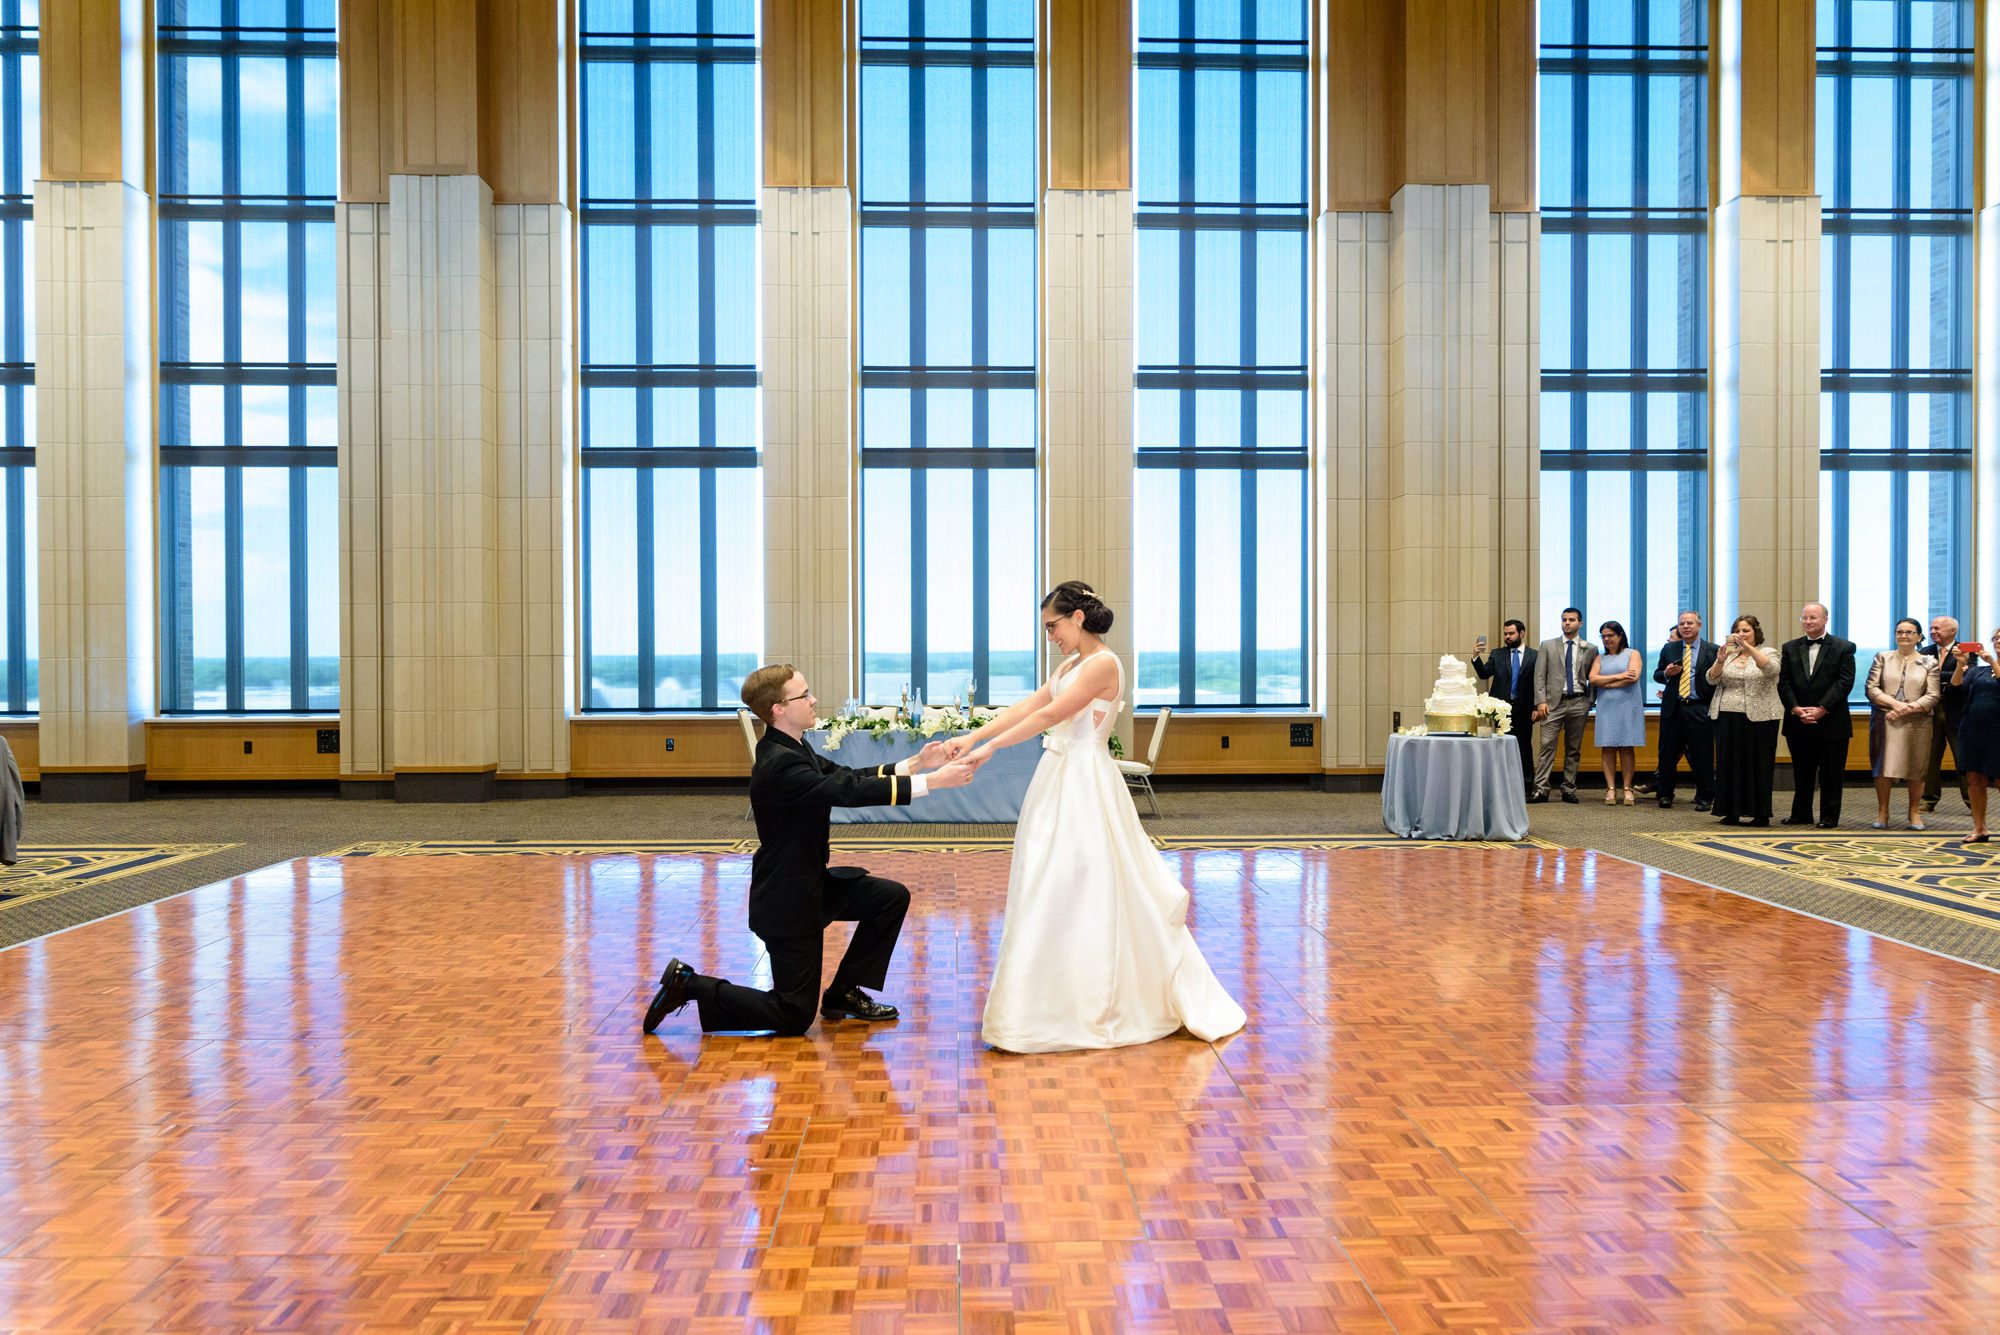 Bride & Groom’s first dance at a Wedding Reception at the Dahnke Ballroom on the campus of the University of Notre Dame